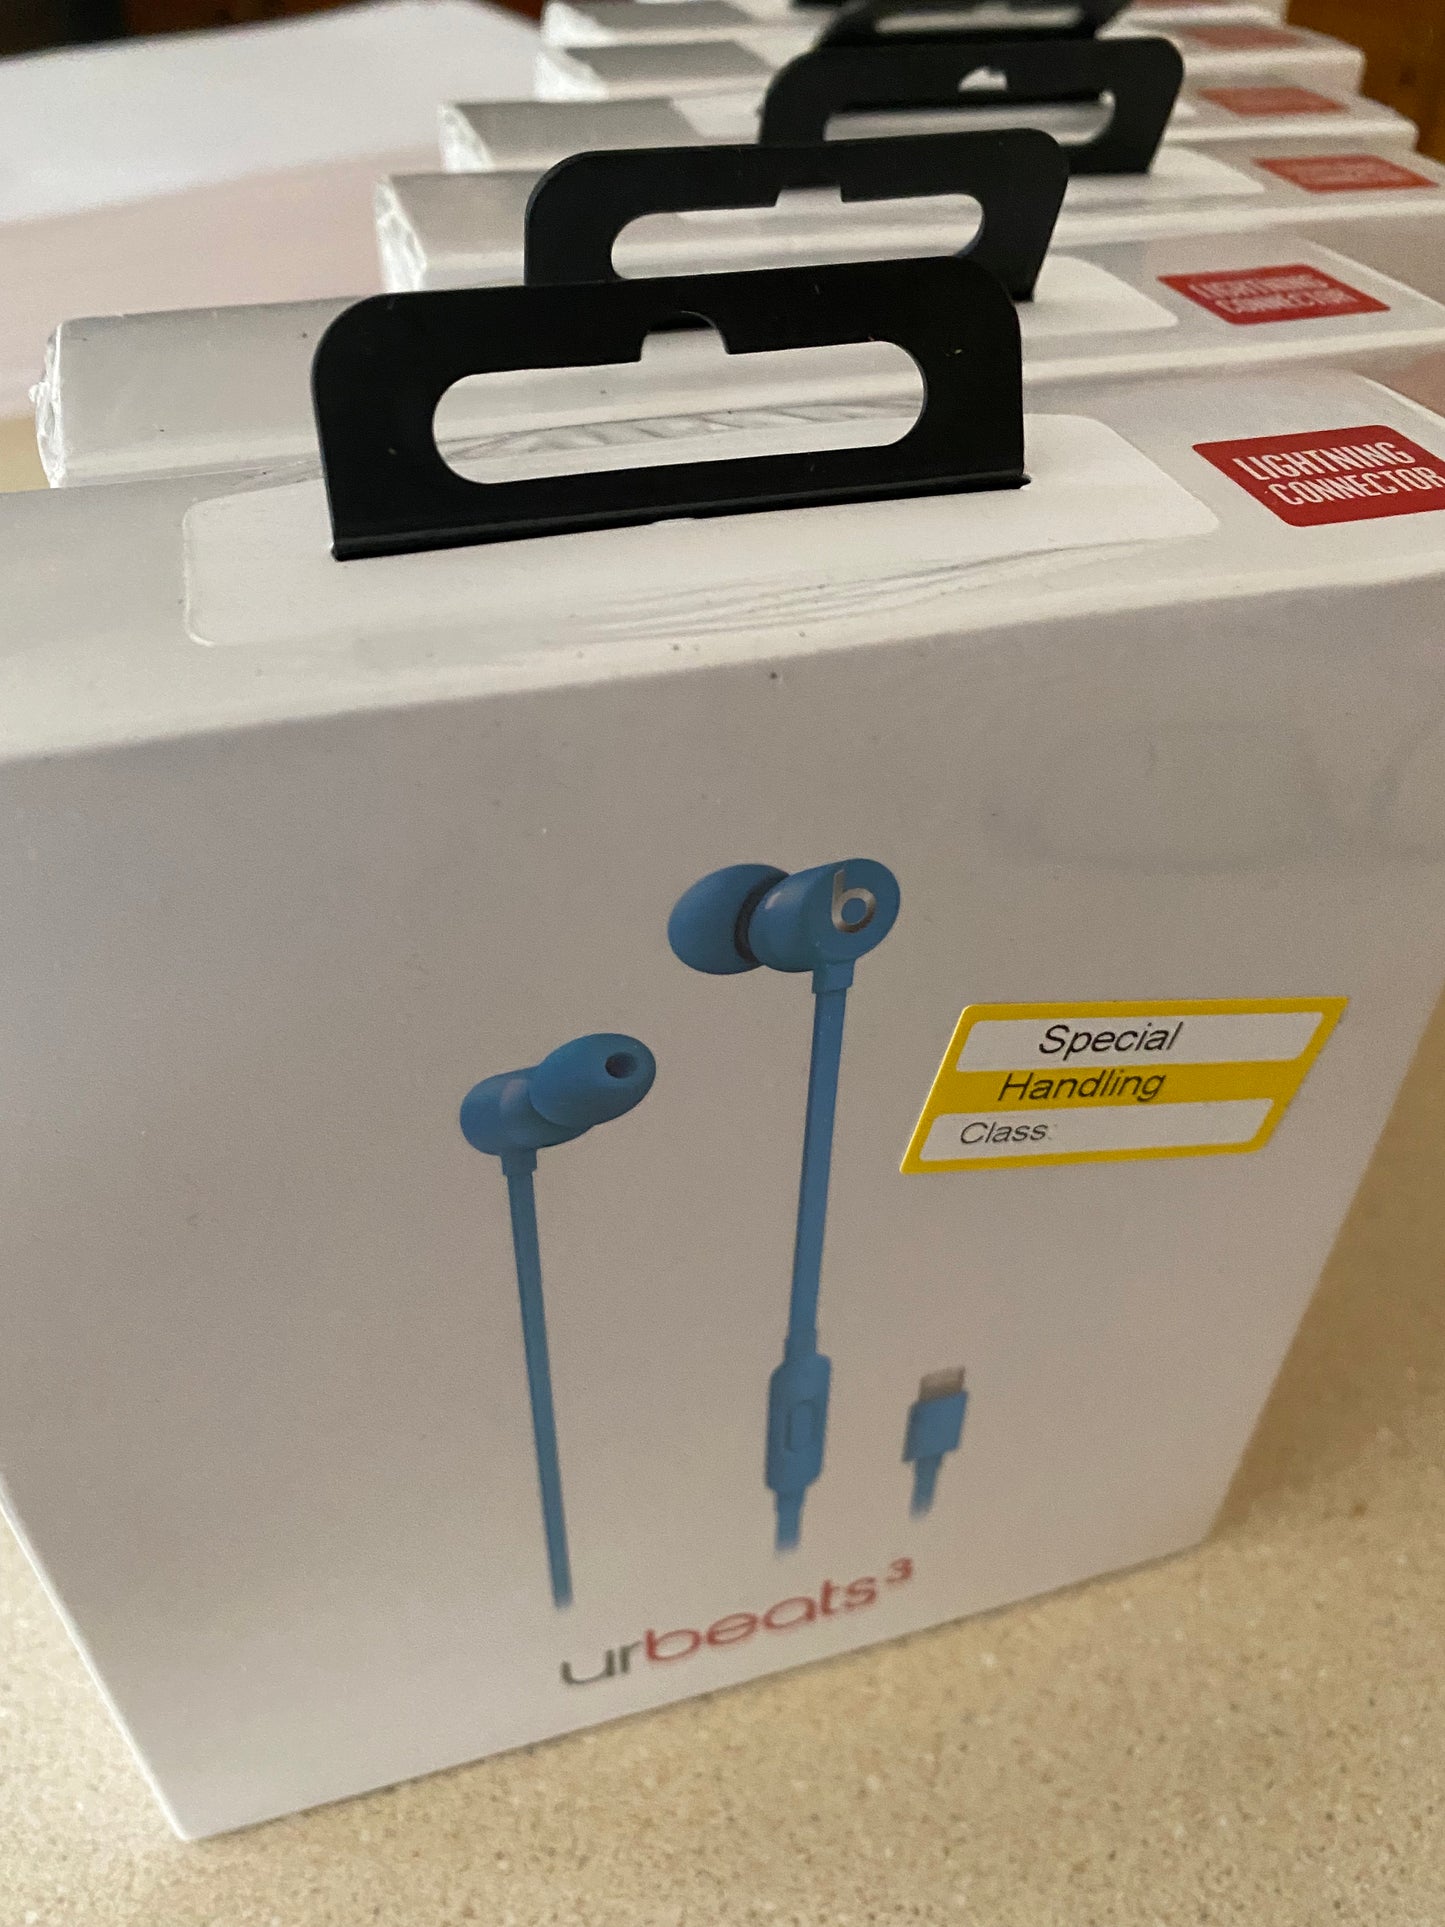 Authentic Beats by Dr. Dre urBeats3 Earbuds Headsets with Lightning Connector Blue Sealed